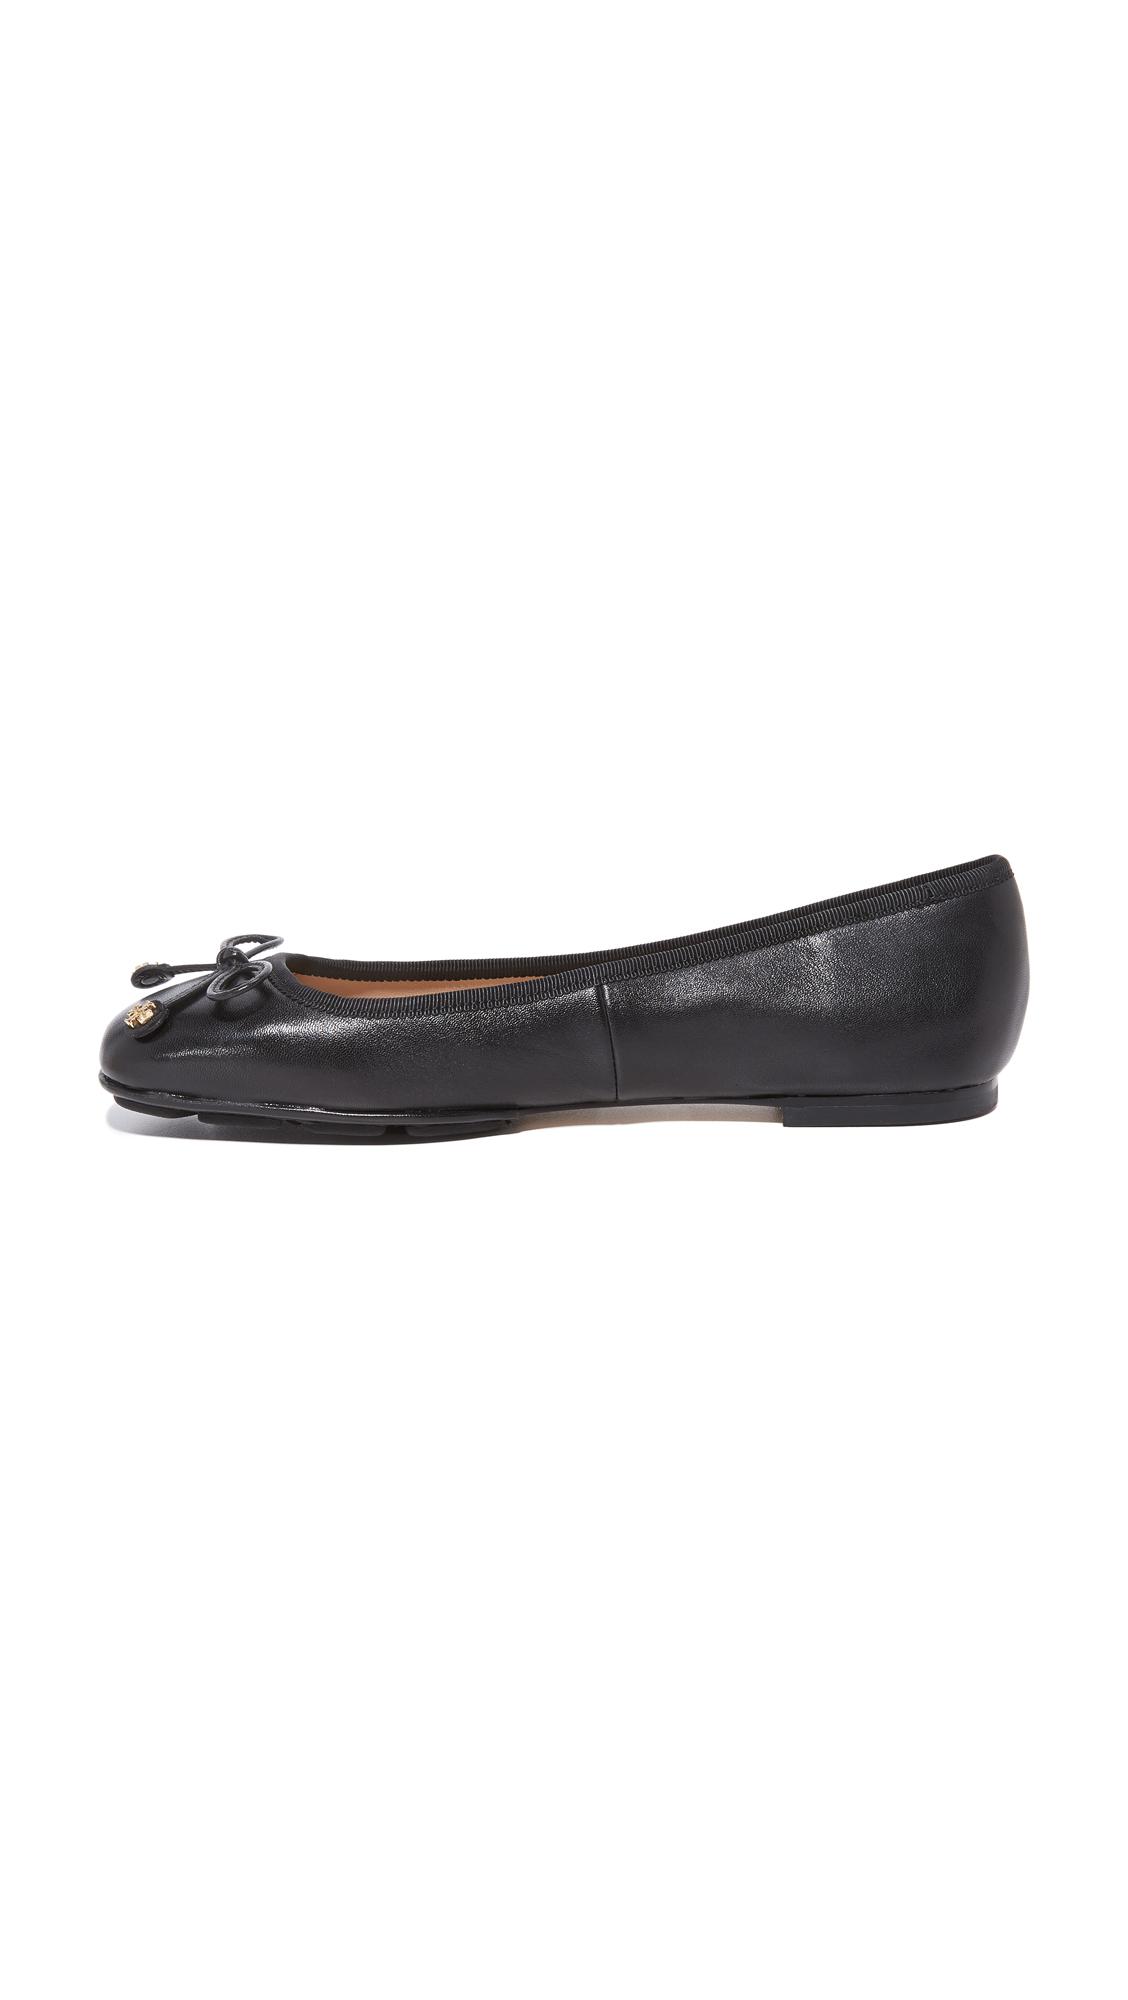 Lyst - Tory Burch Laila Driver Ballet Flats in Black